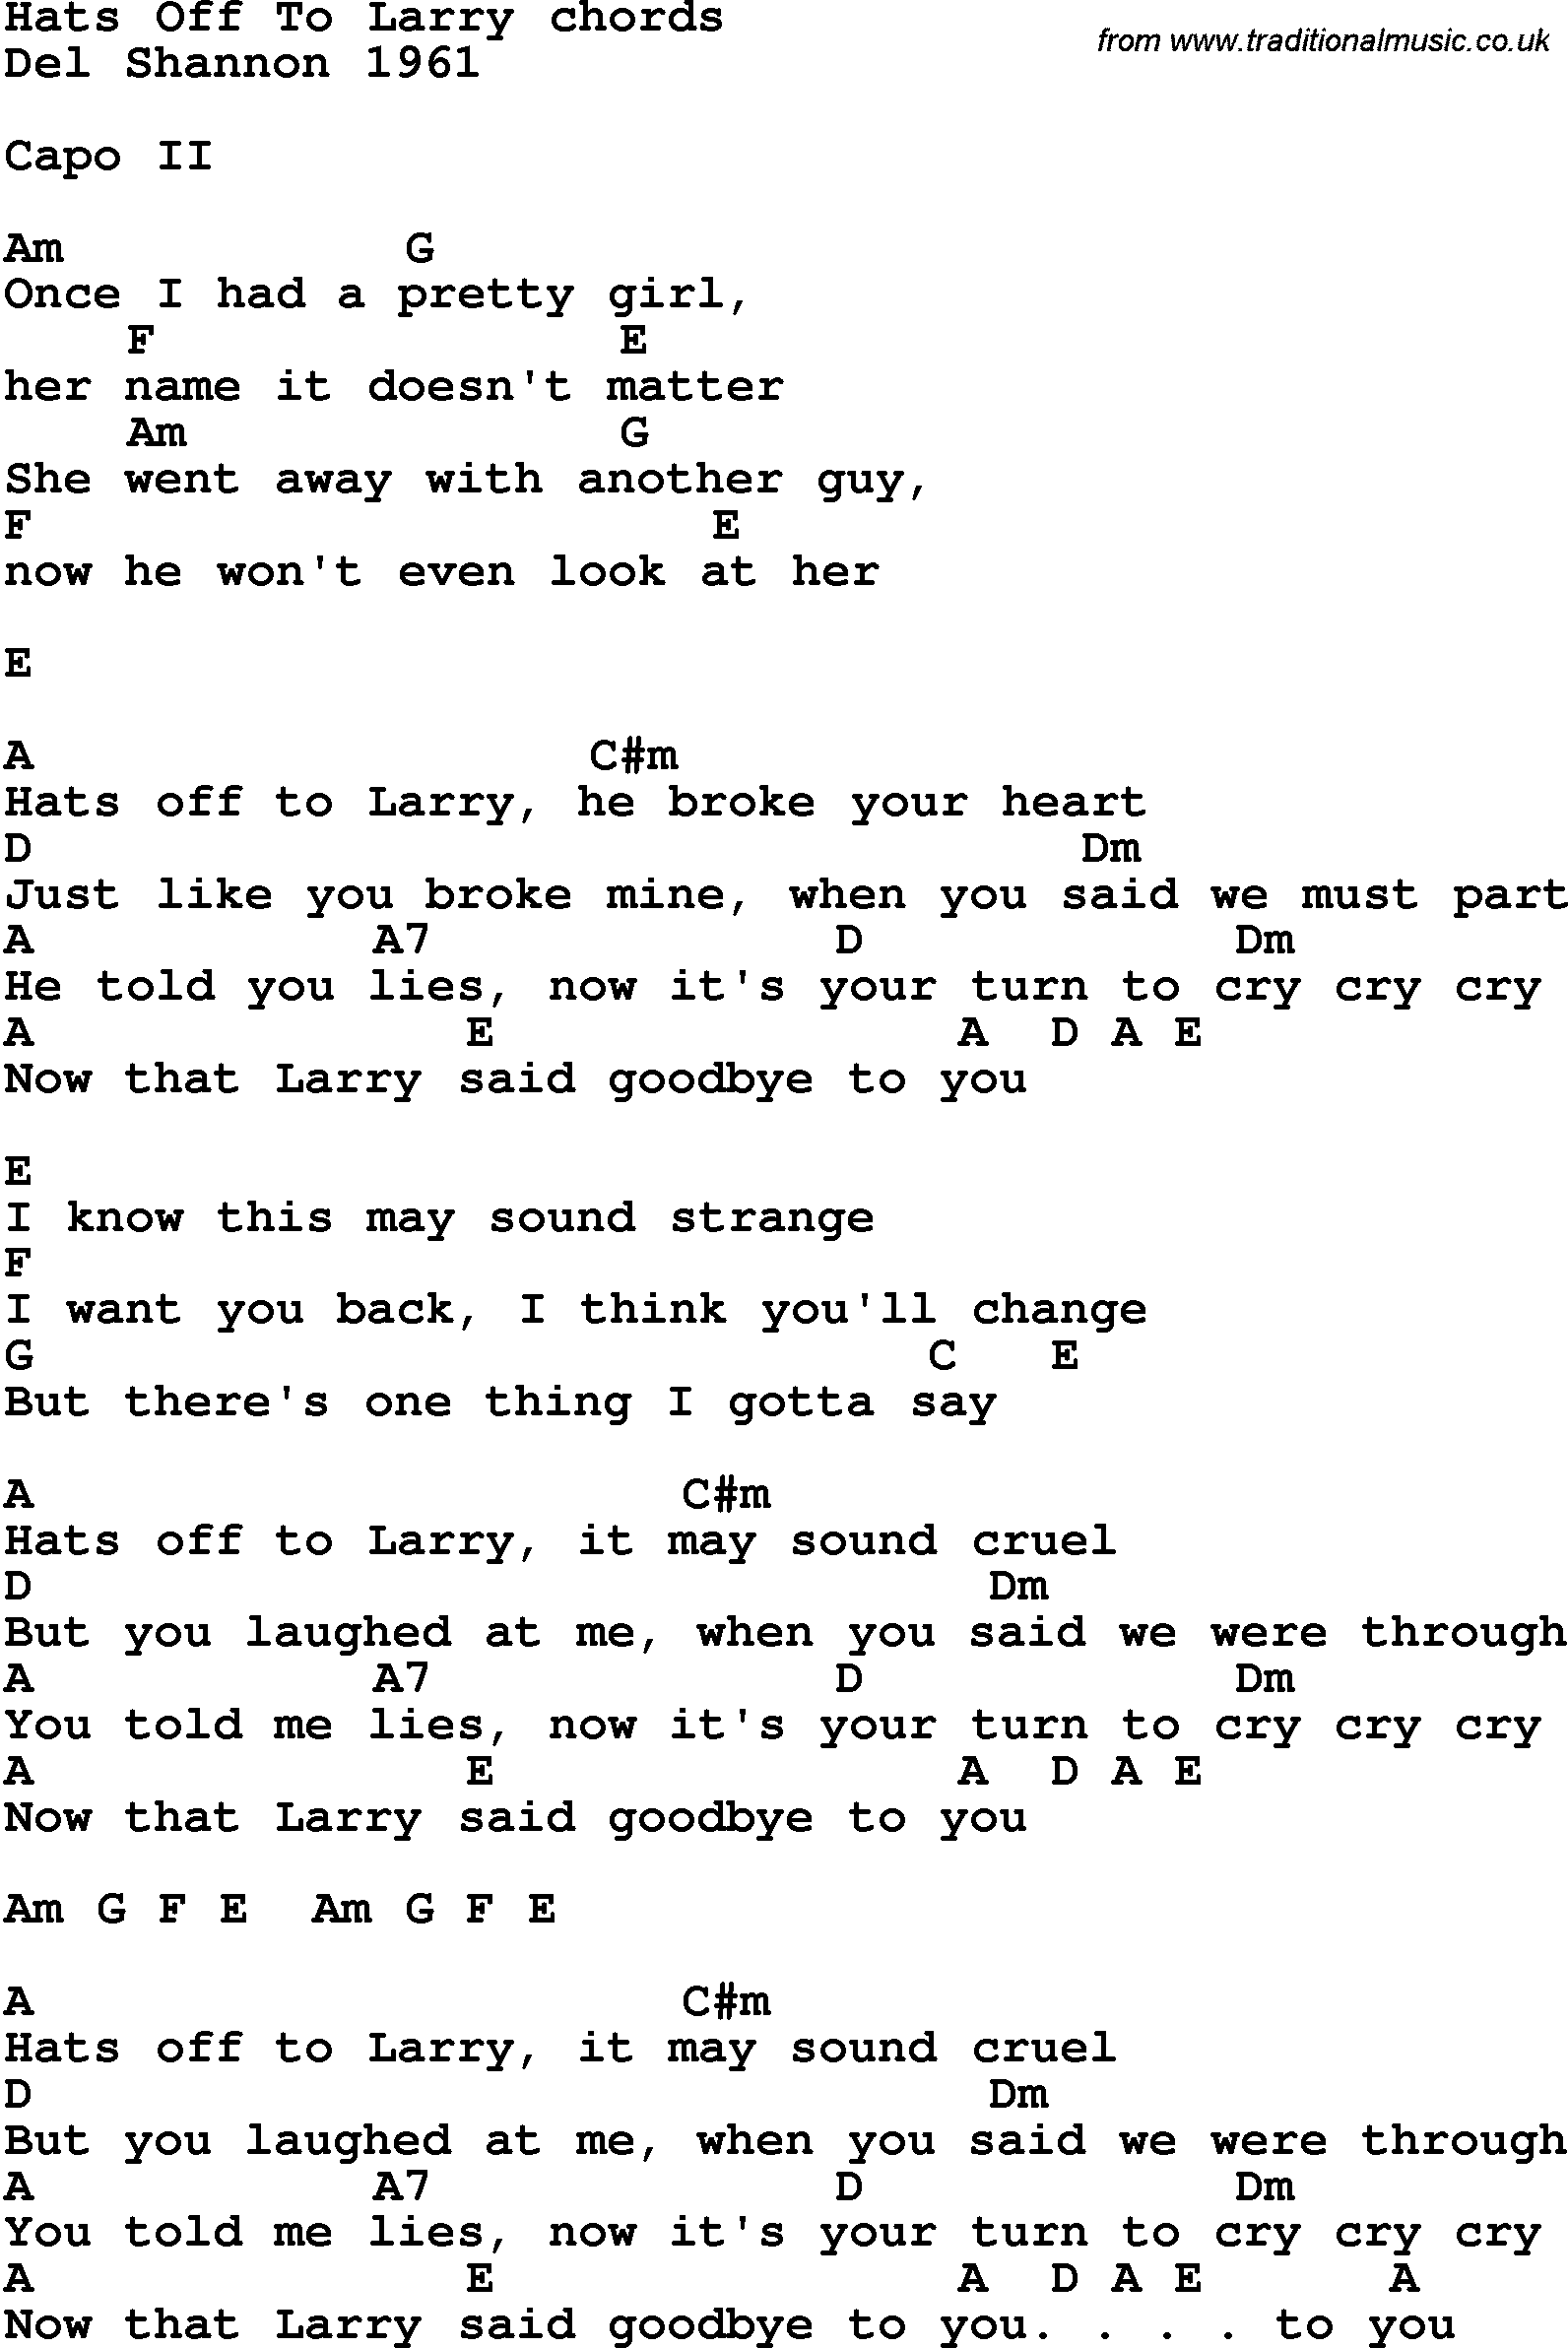 Song Lyrics with guitar chords for Hats Off To Larry